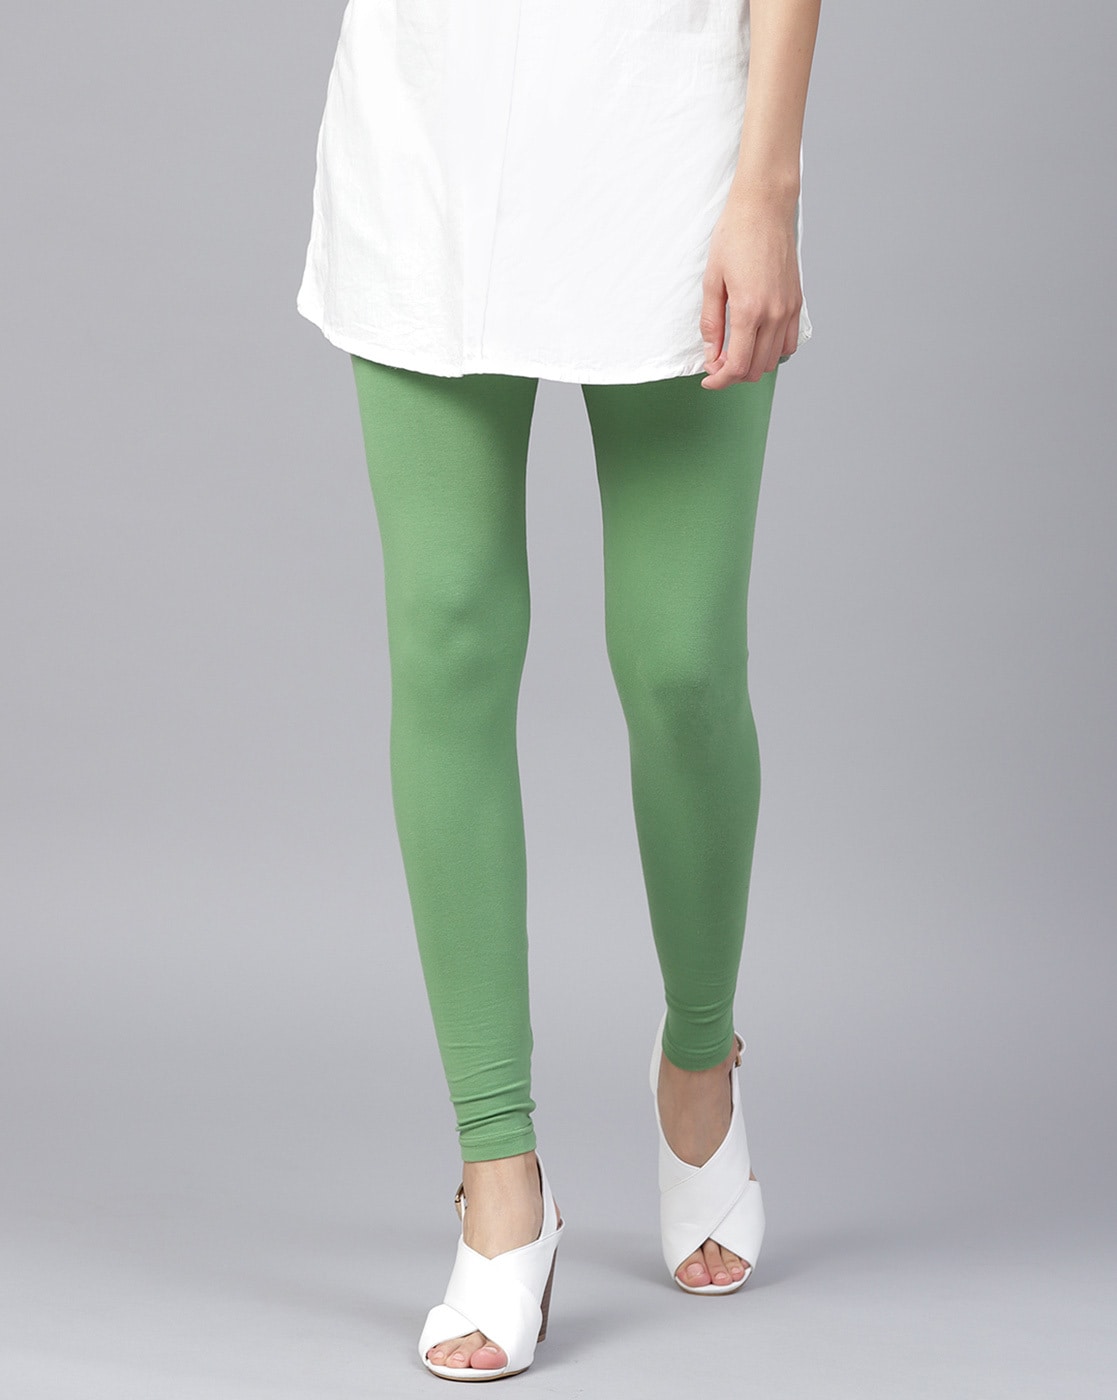 Shop for Green | Leggings & Joggers | Womens | online at Freemans